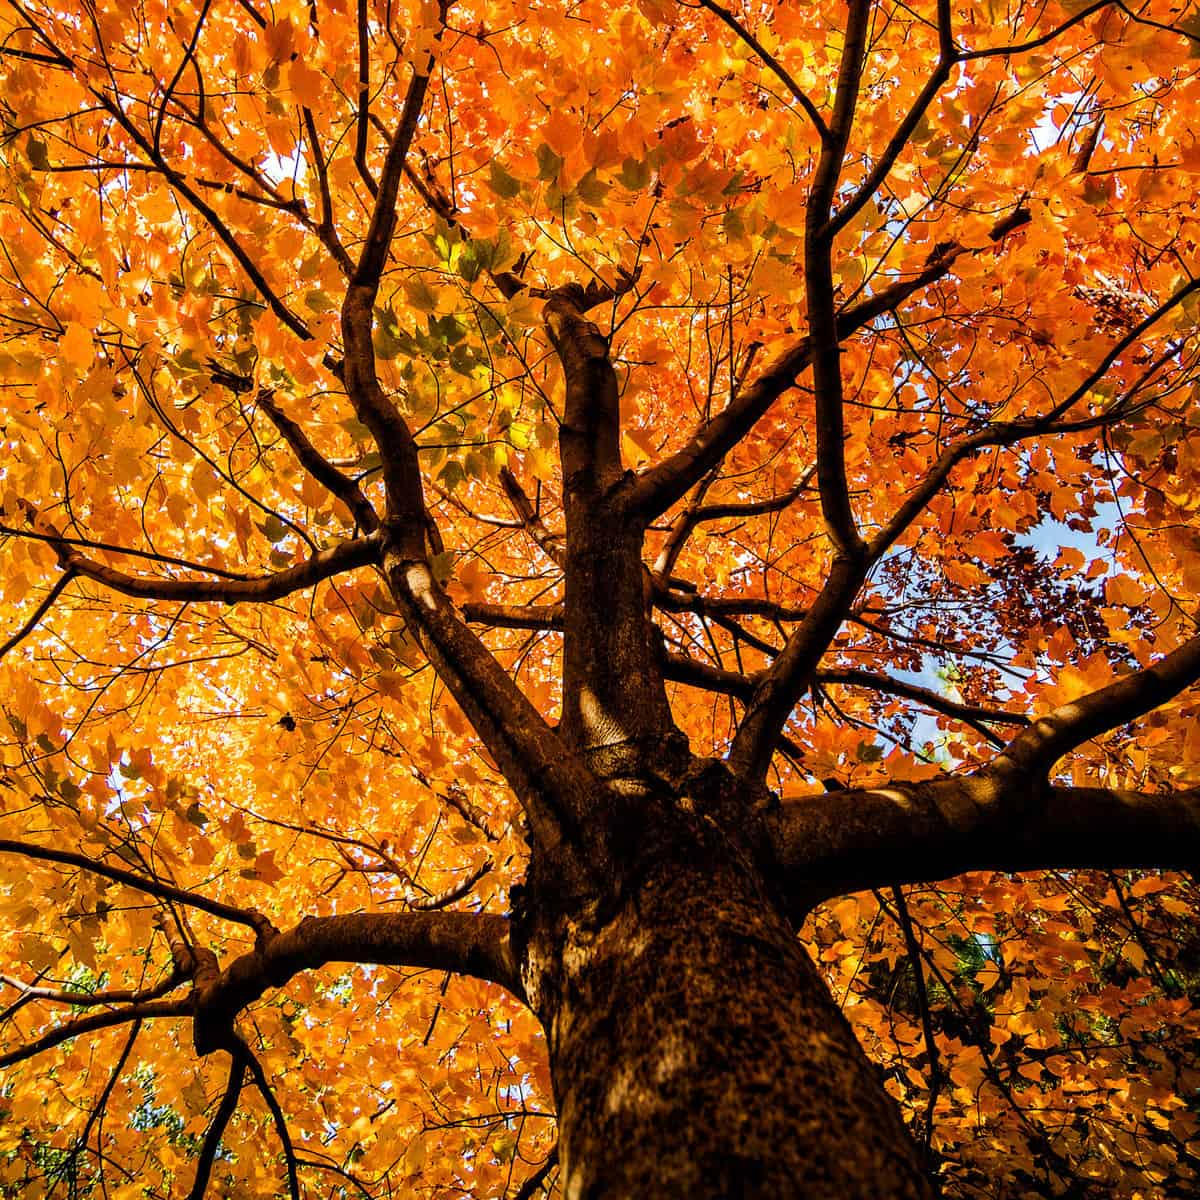 A maple tree photographed underneath